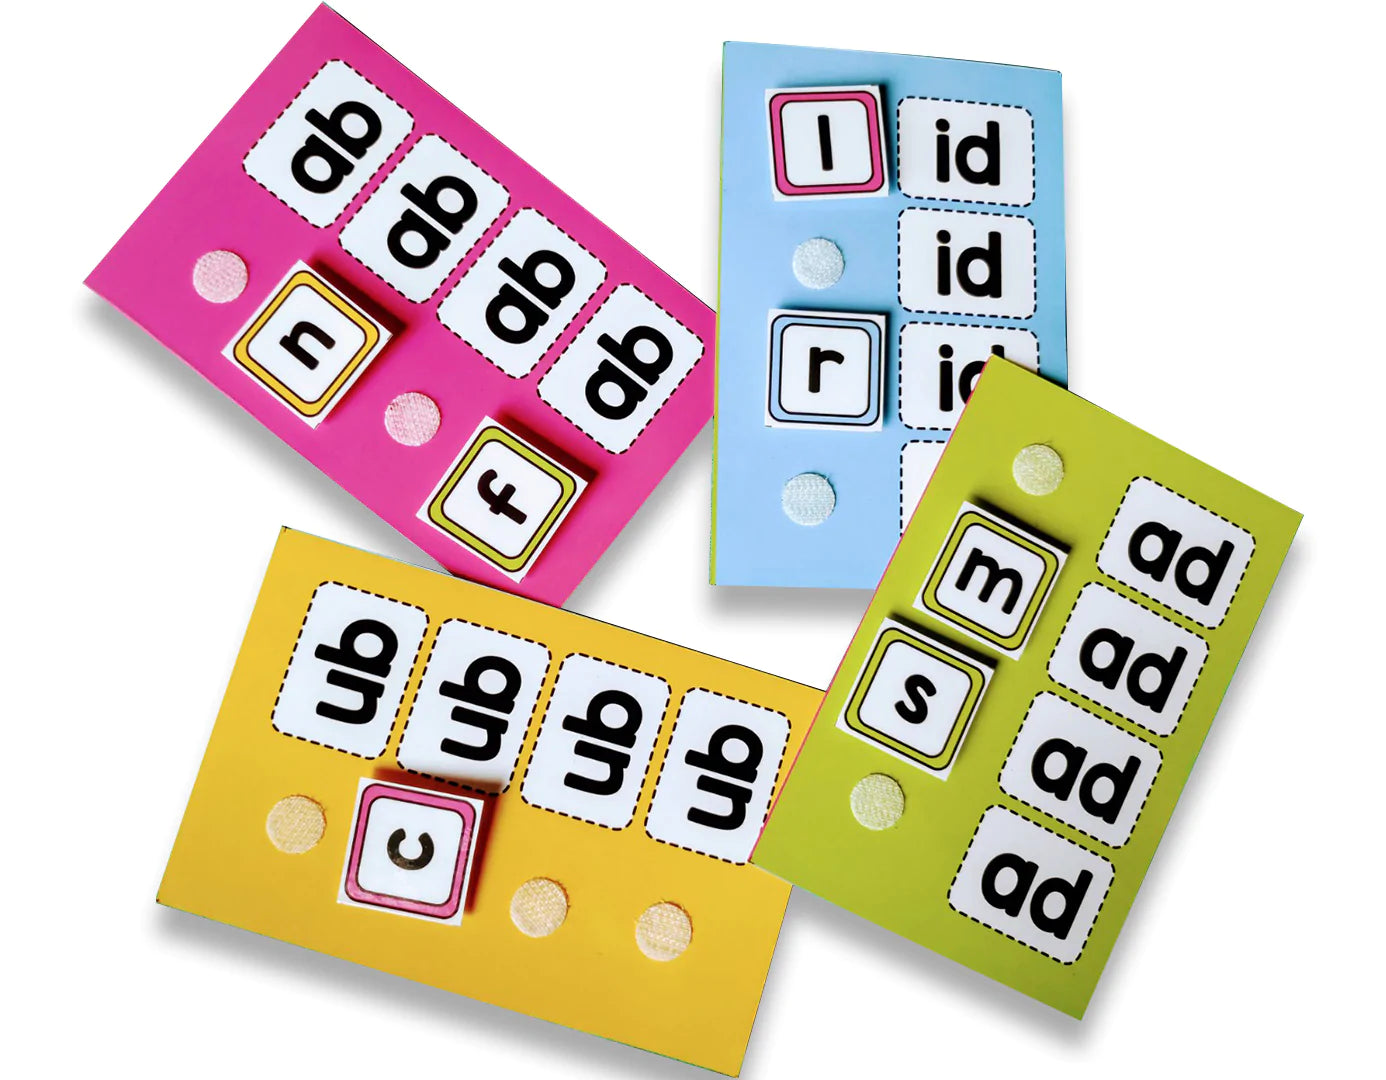 Buy CVC Word Building and Learning Activity -  Word Forming Game - SkilloToys.com